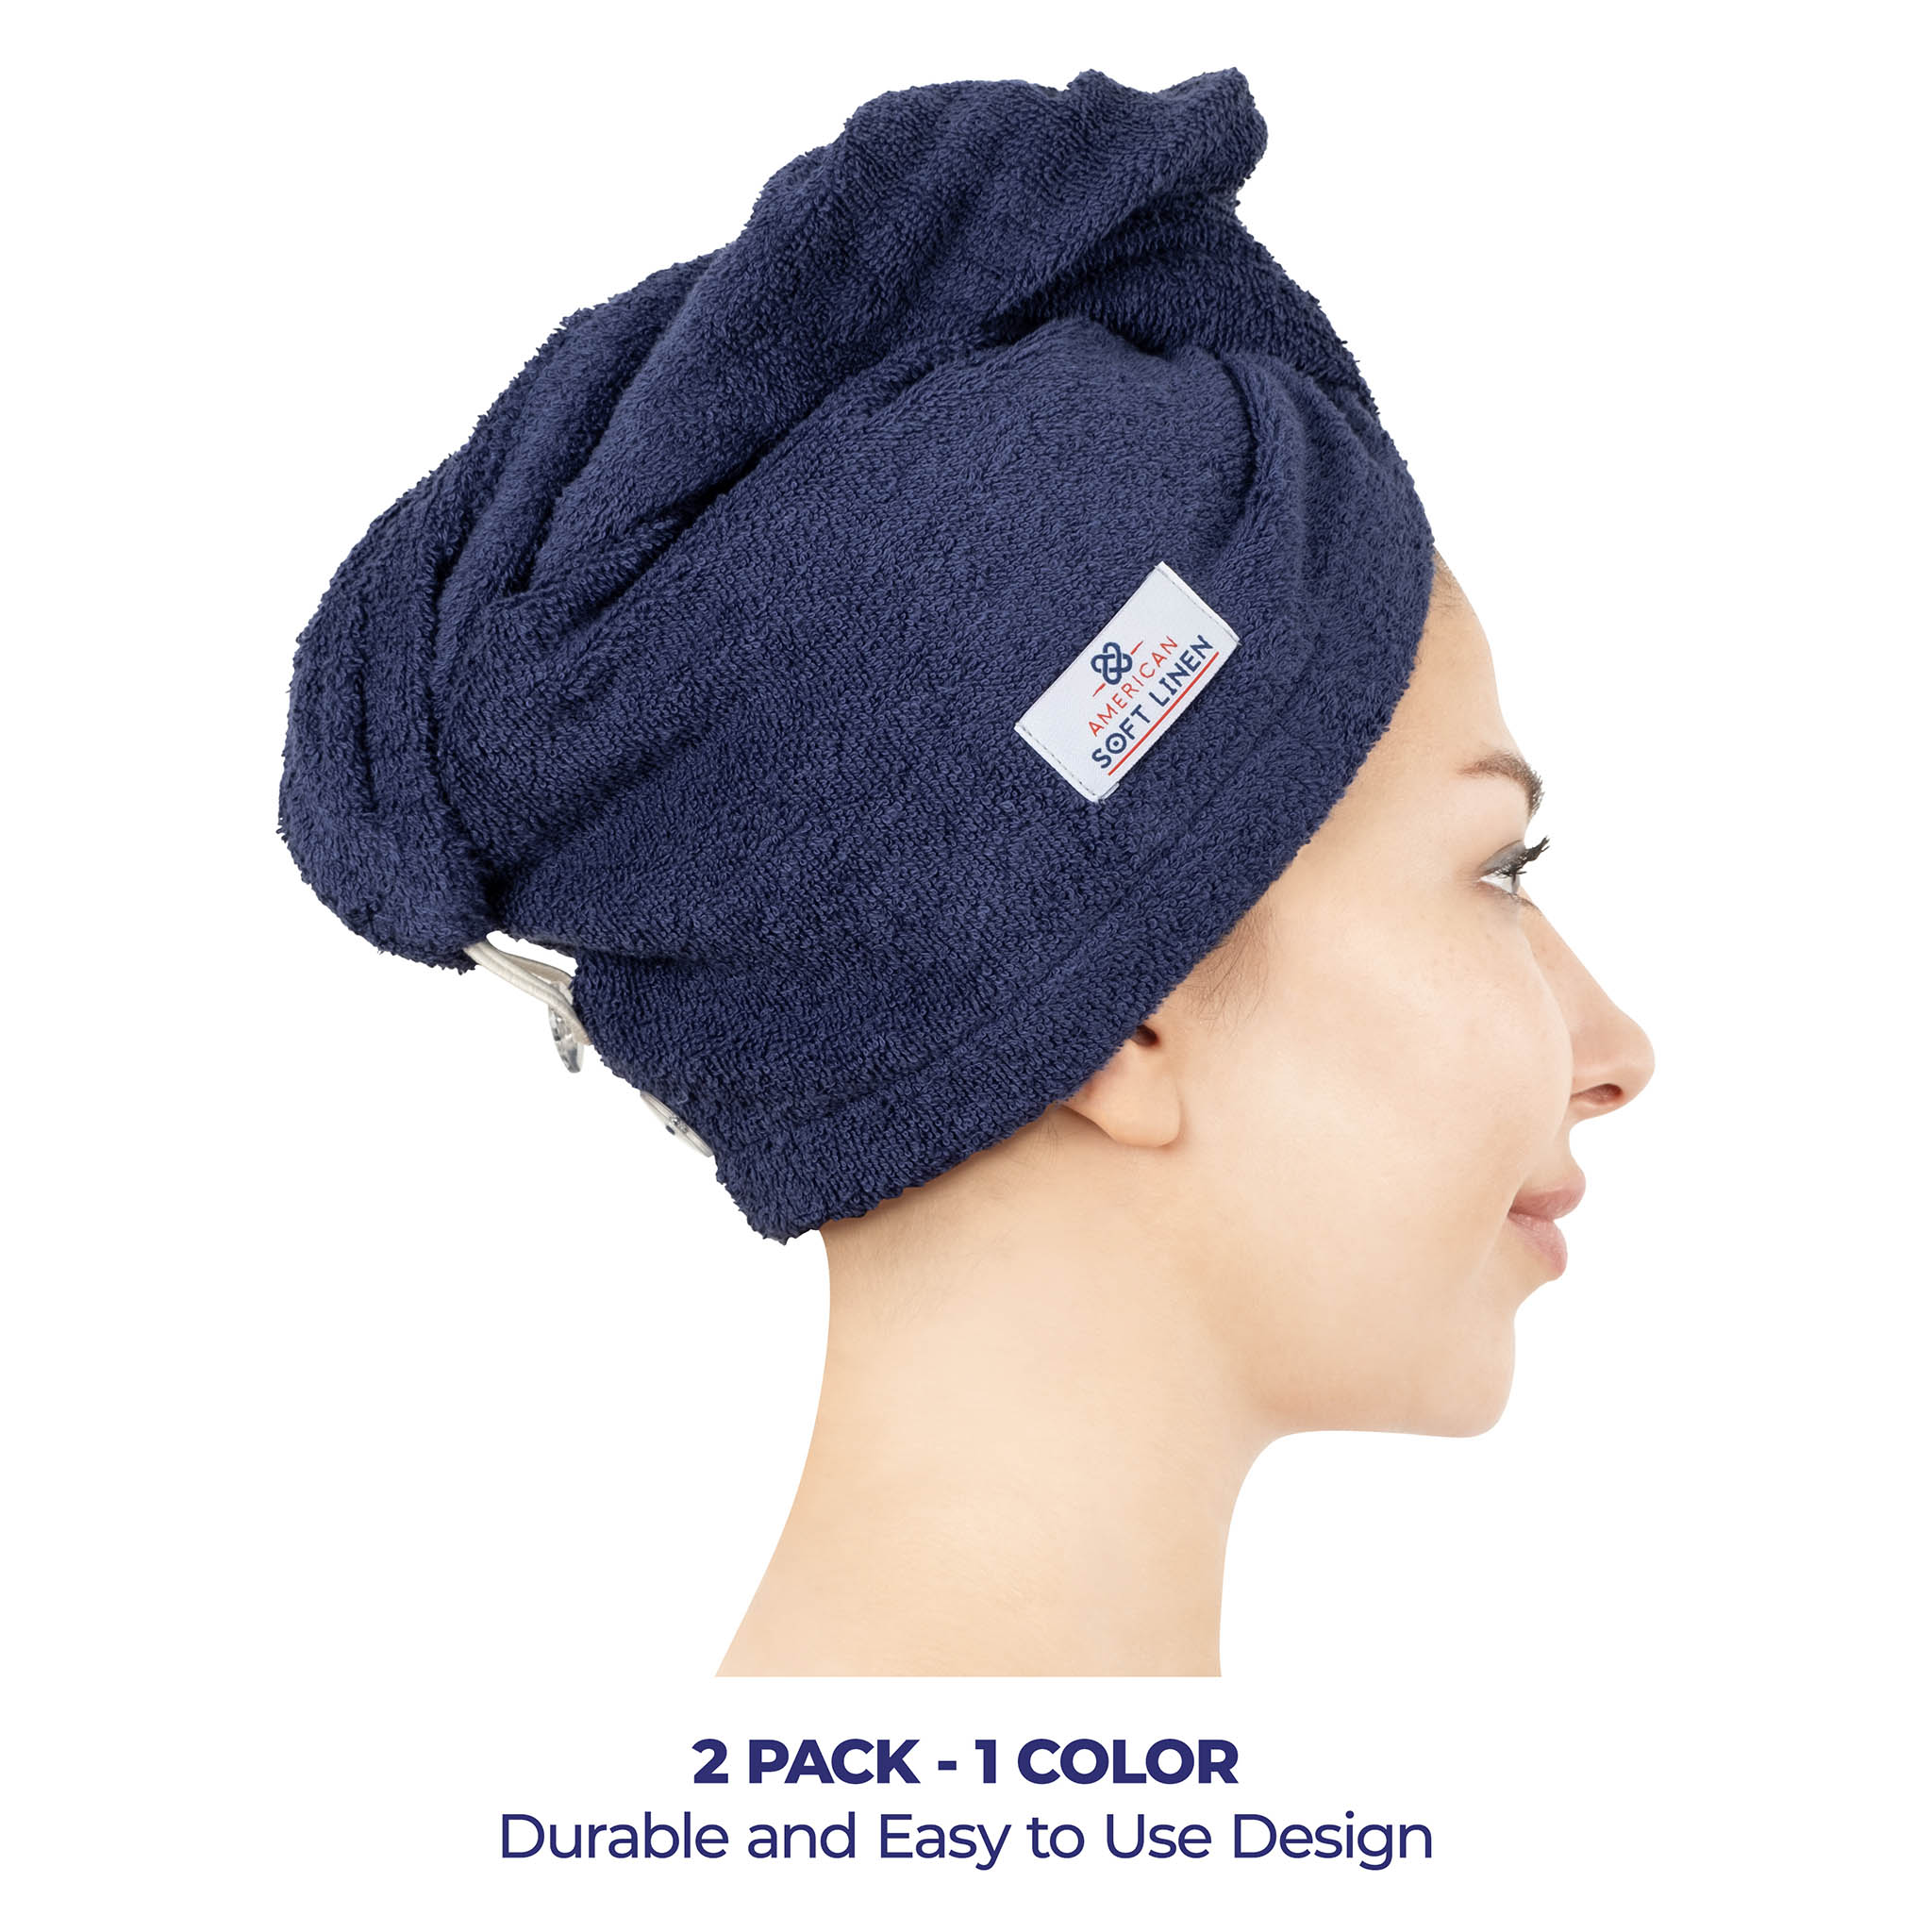 American Soft Linen 100% Cotton Hair Drying Towels for Women Navy Blue-2